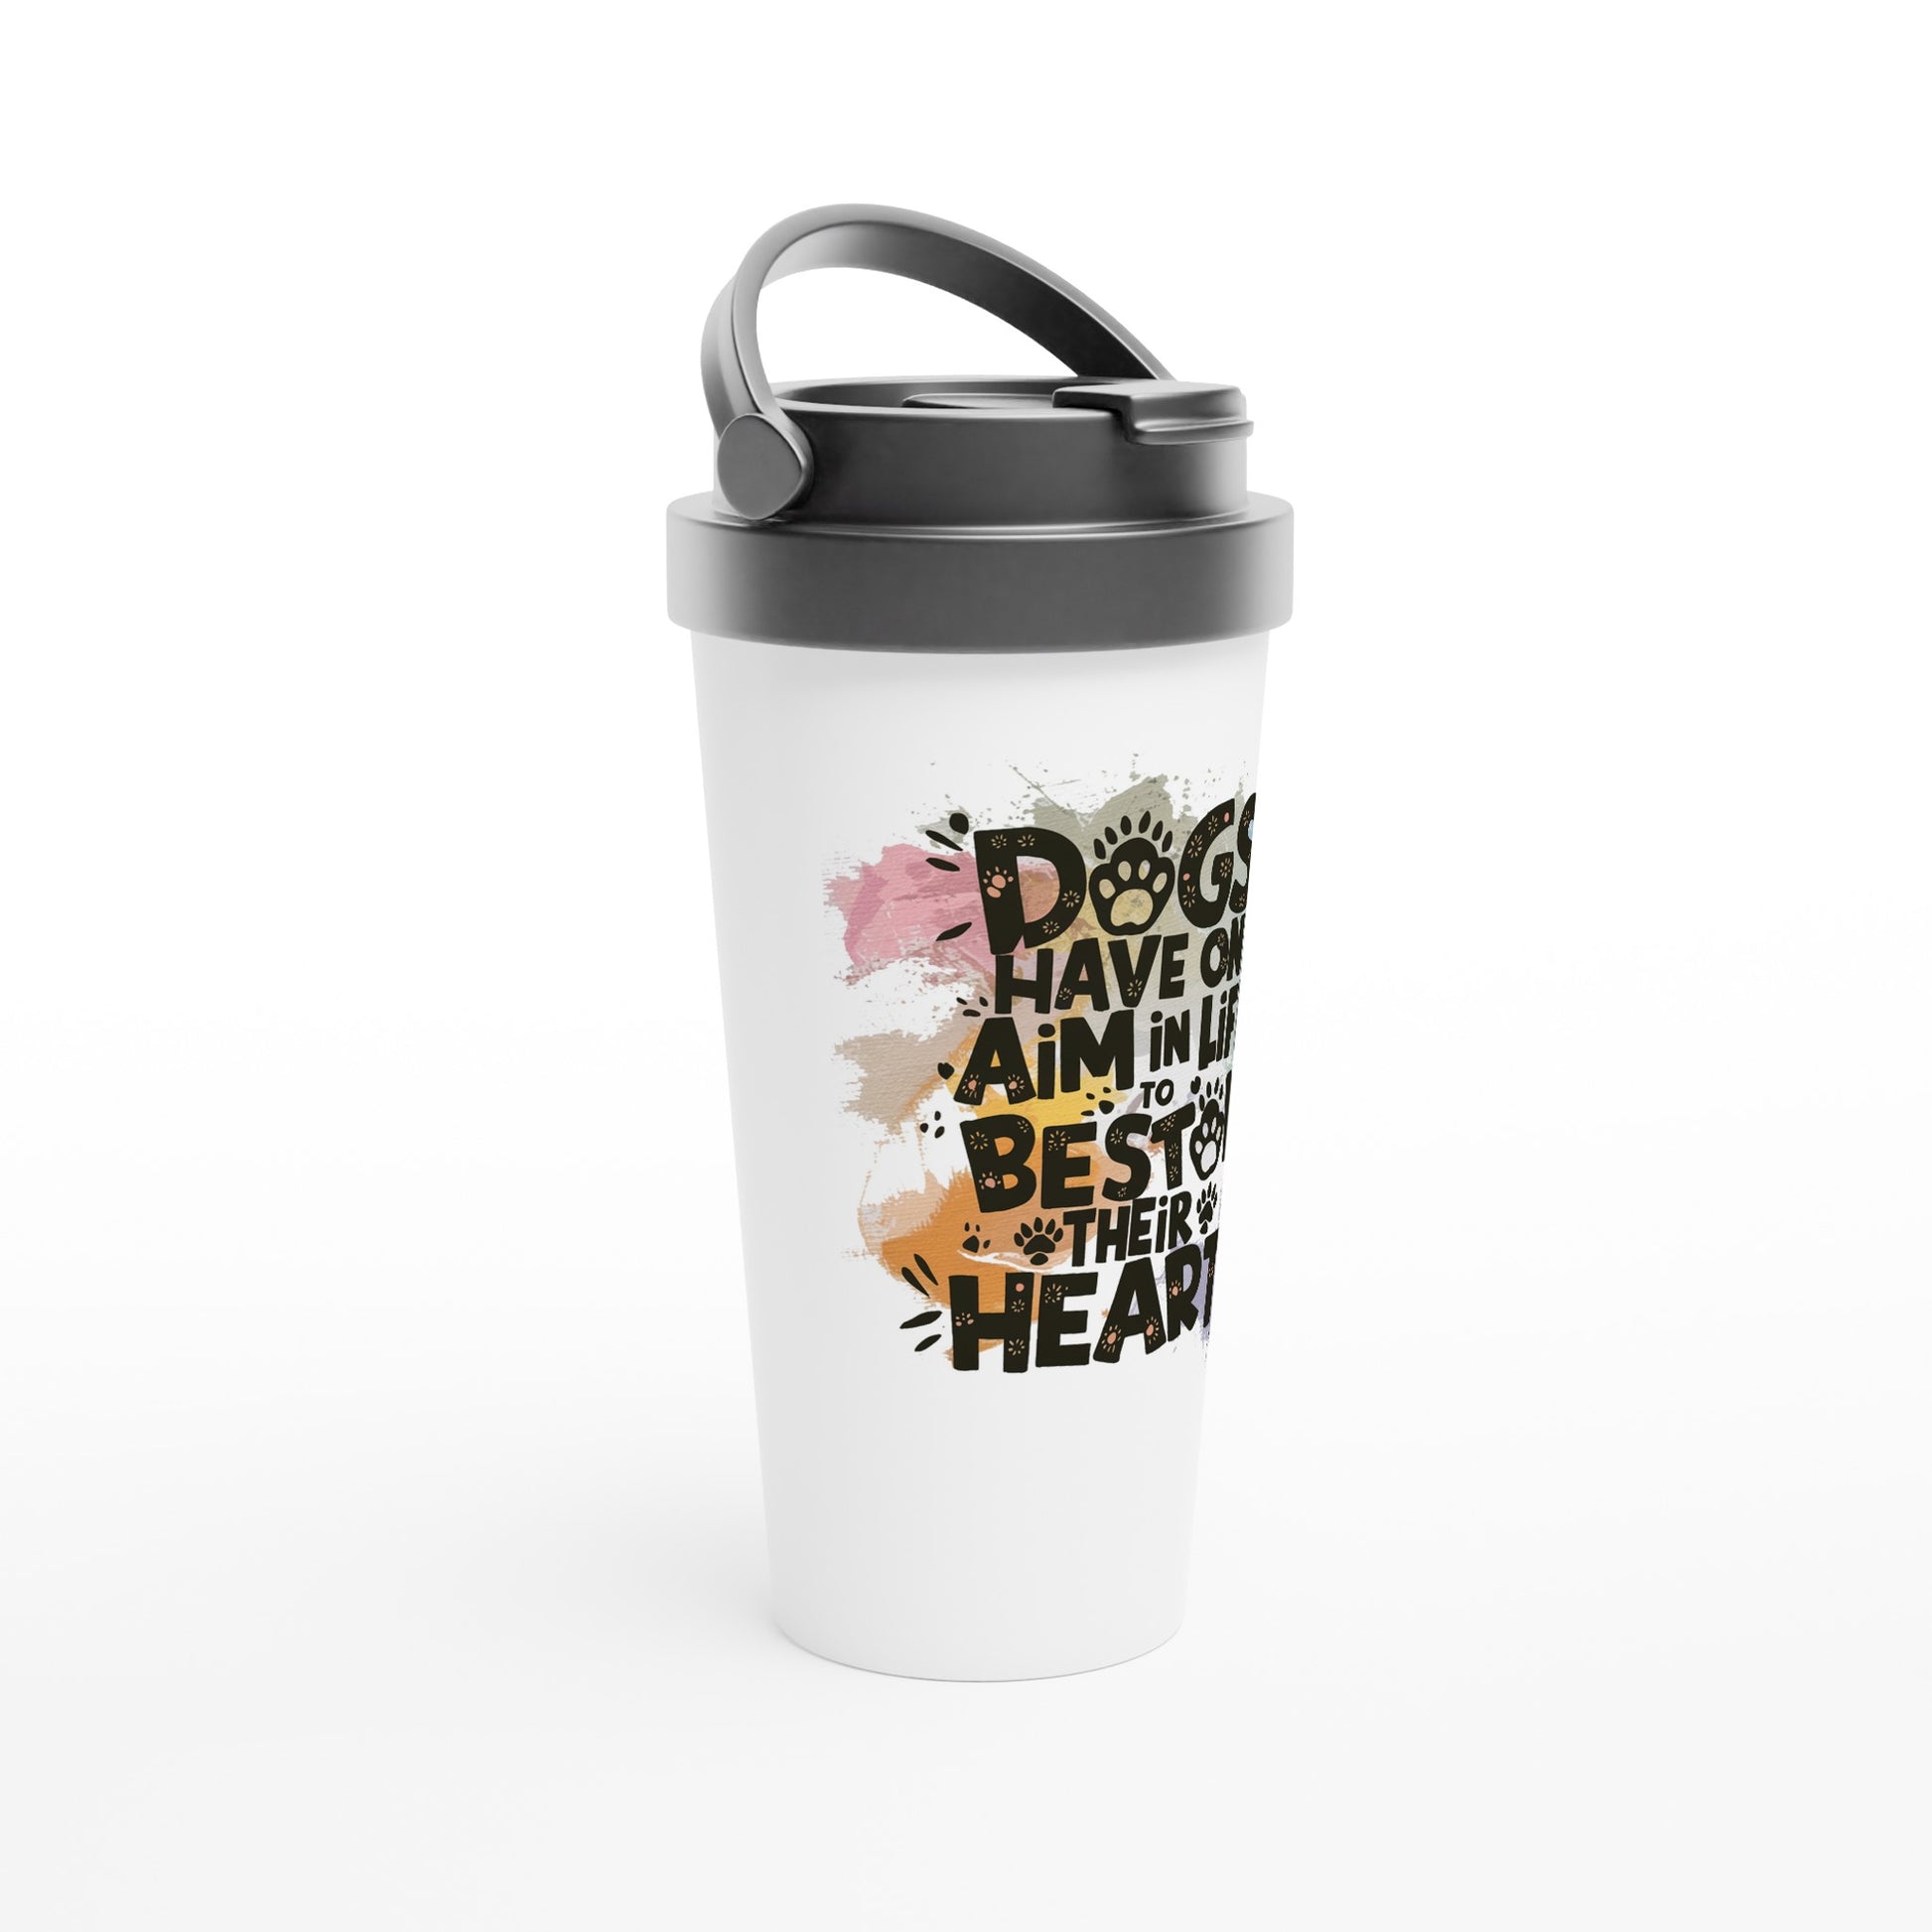 Left sideview of Travel Mug with the design: "Dogs Have One Aim in Life... To Bestow Their Hearts". The Travel Mug's color is white